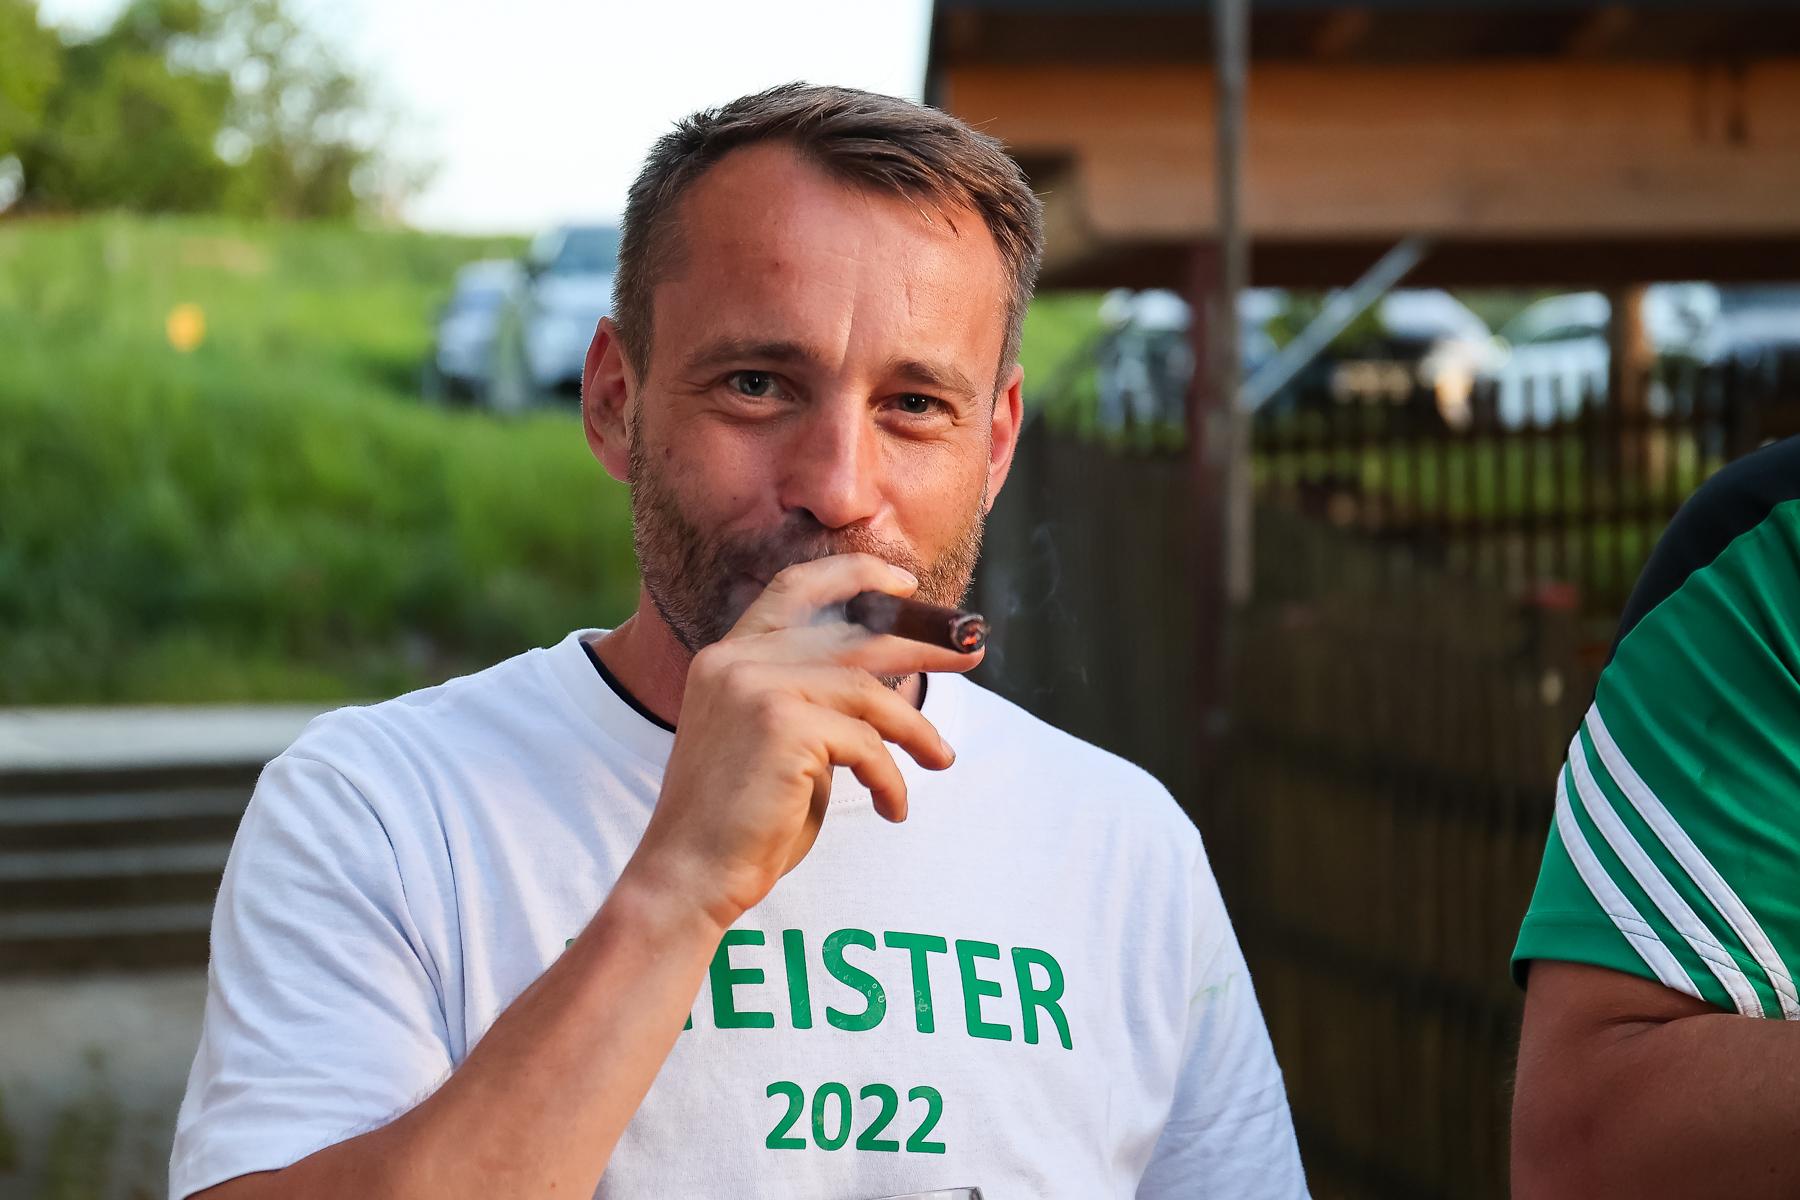 A Meister 2022 10